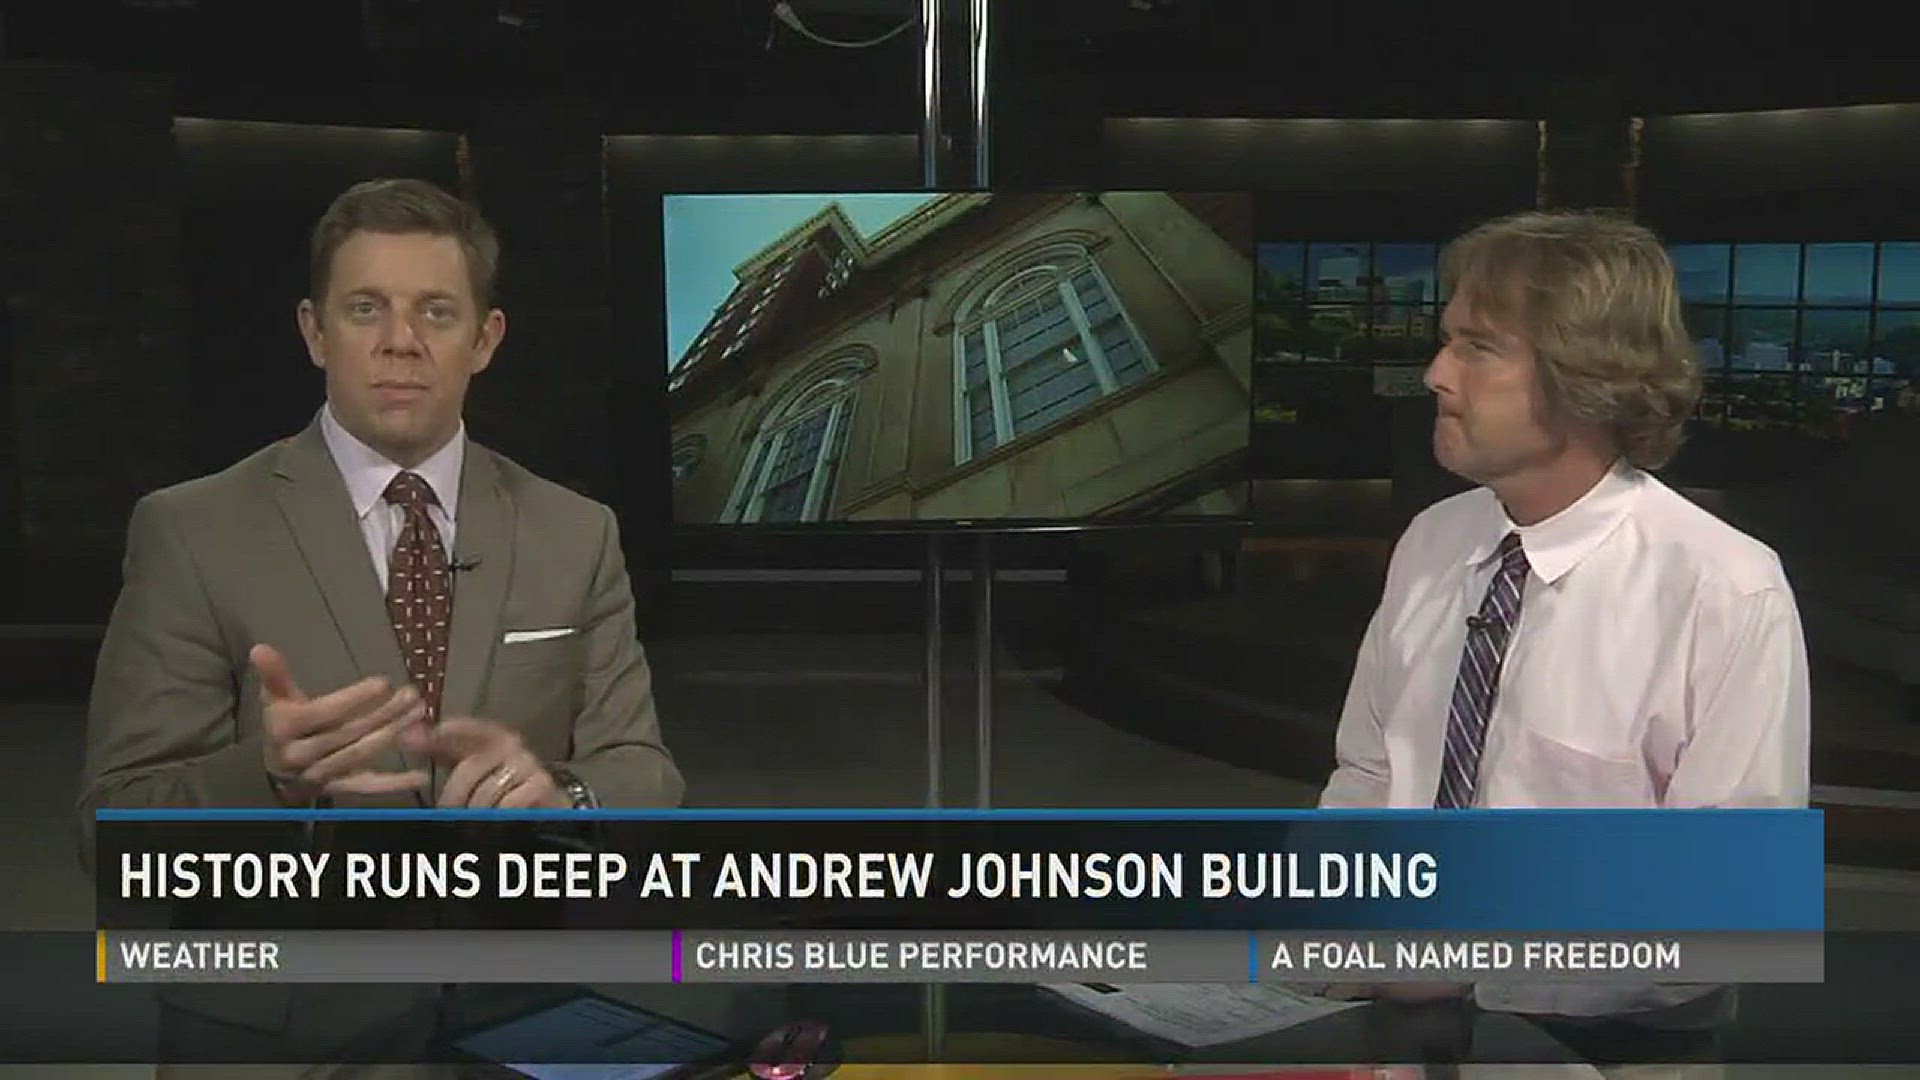 John North joins John Becker to talk about the rich history at the Andrew Johnson building after Knox County announced it plans to give up the building.